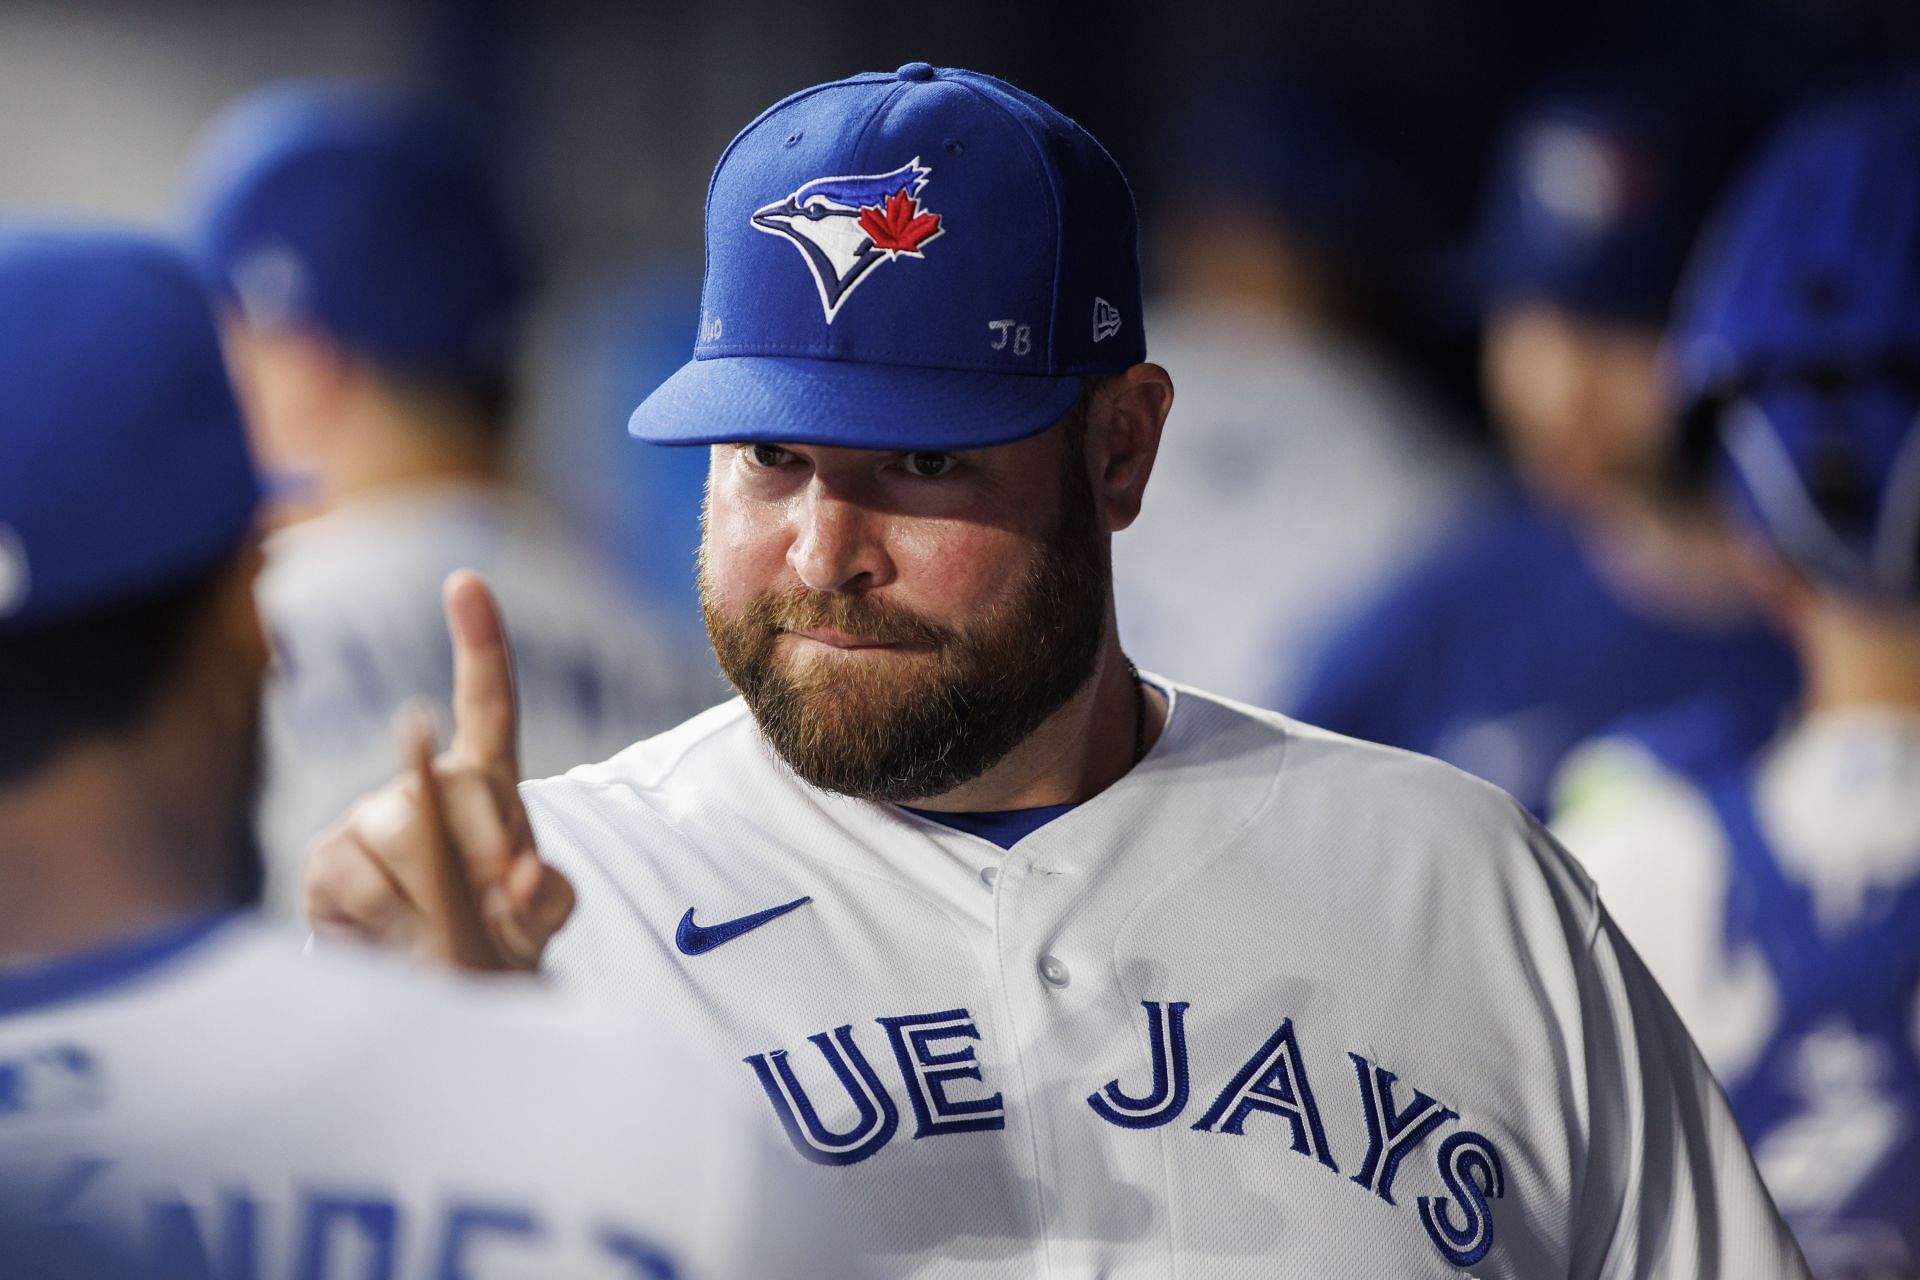 John Schneider rose through the ranks of the Blue Jays&rsquo; farm system as a manager